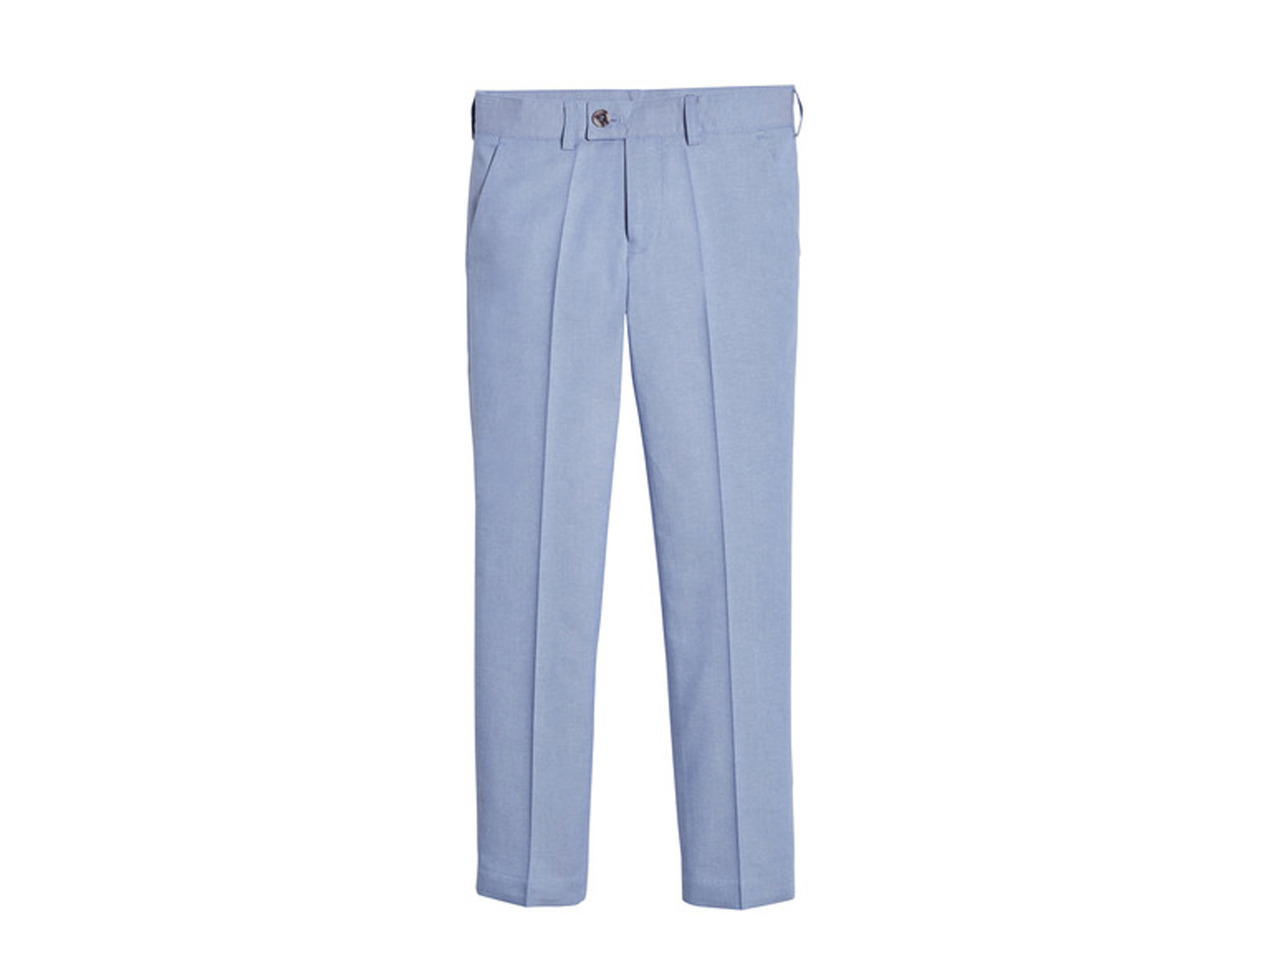 PEPPERTS Kids' Suit Trousers